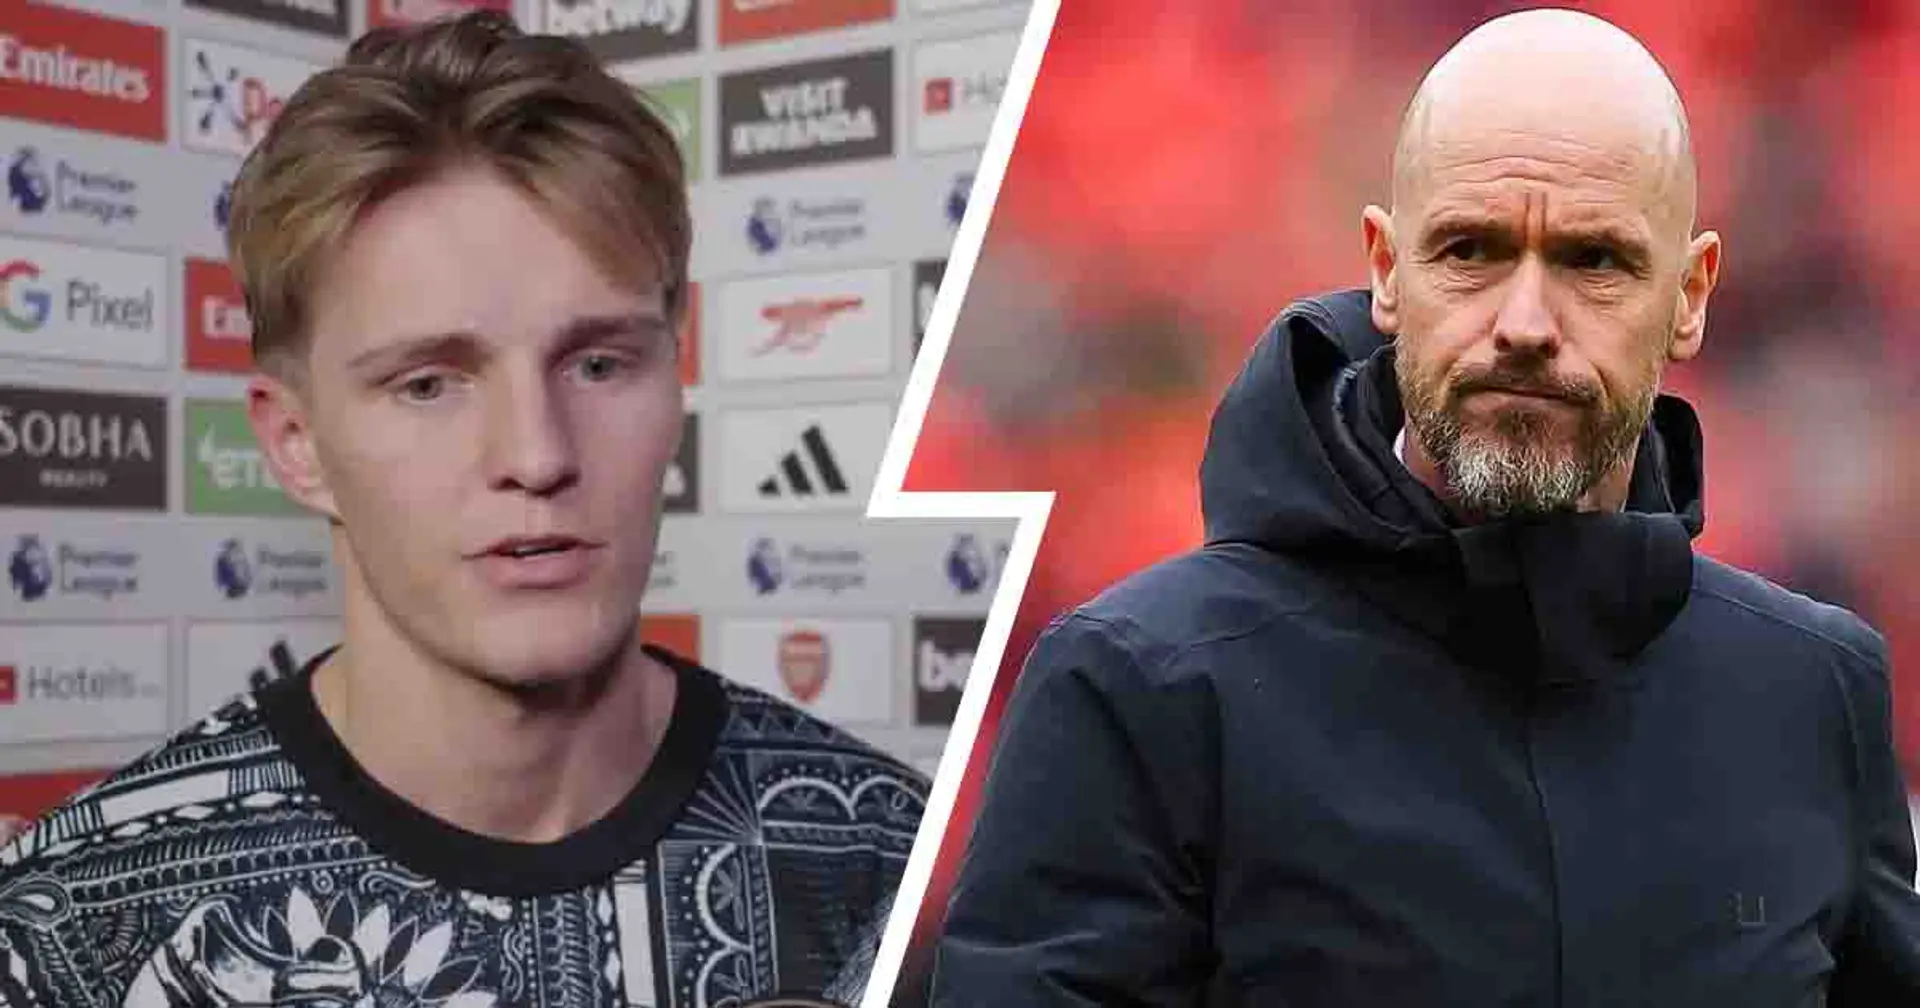 'We know what we are playing for': Odegaard responds to Erik ten Hag's persistent digs at Arsenal